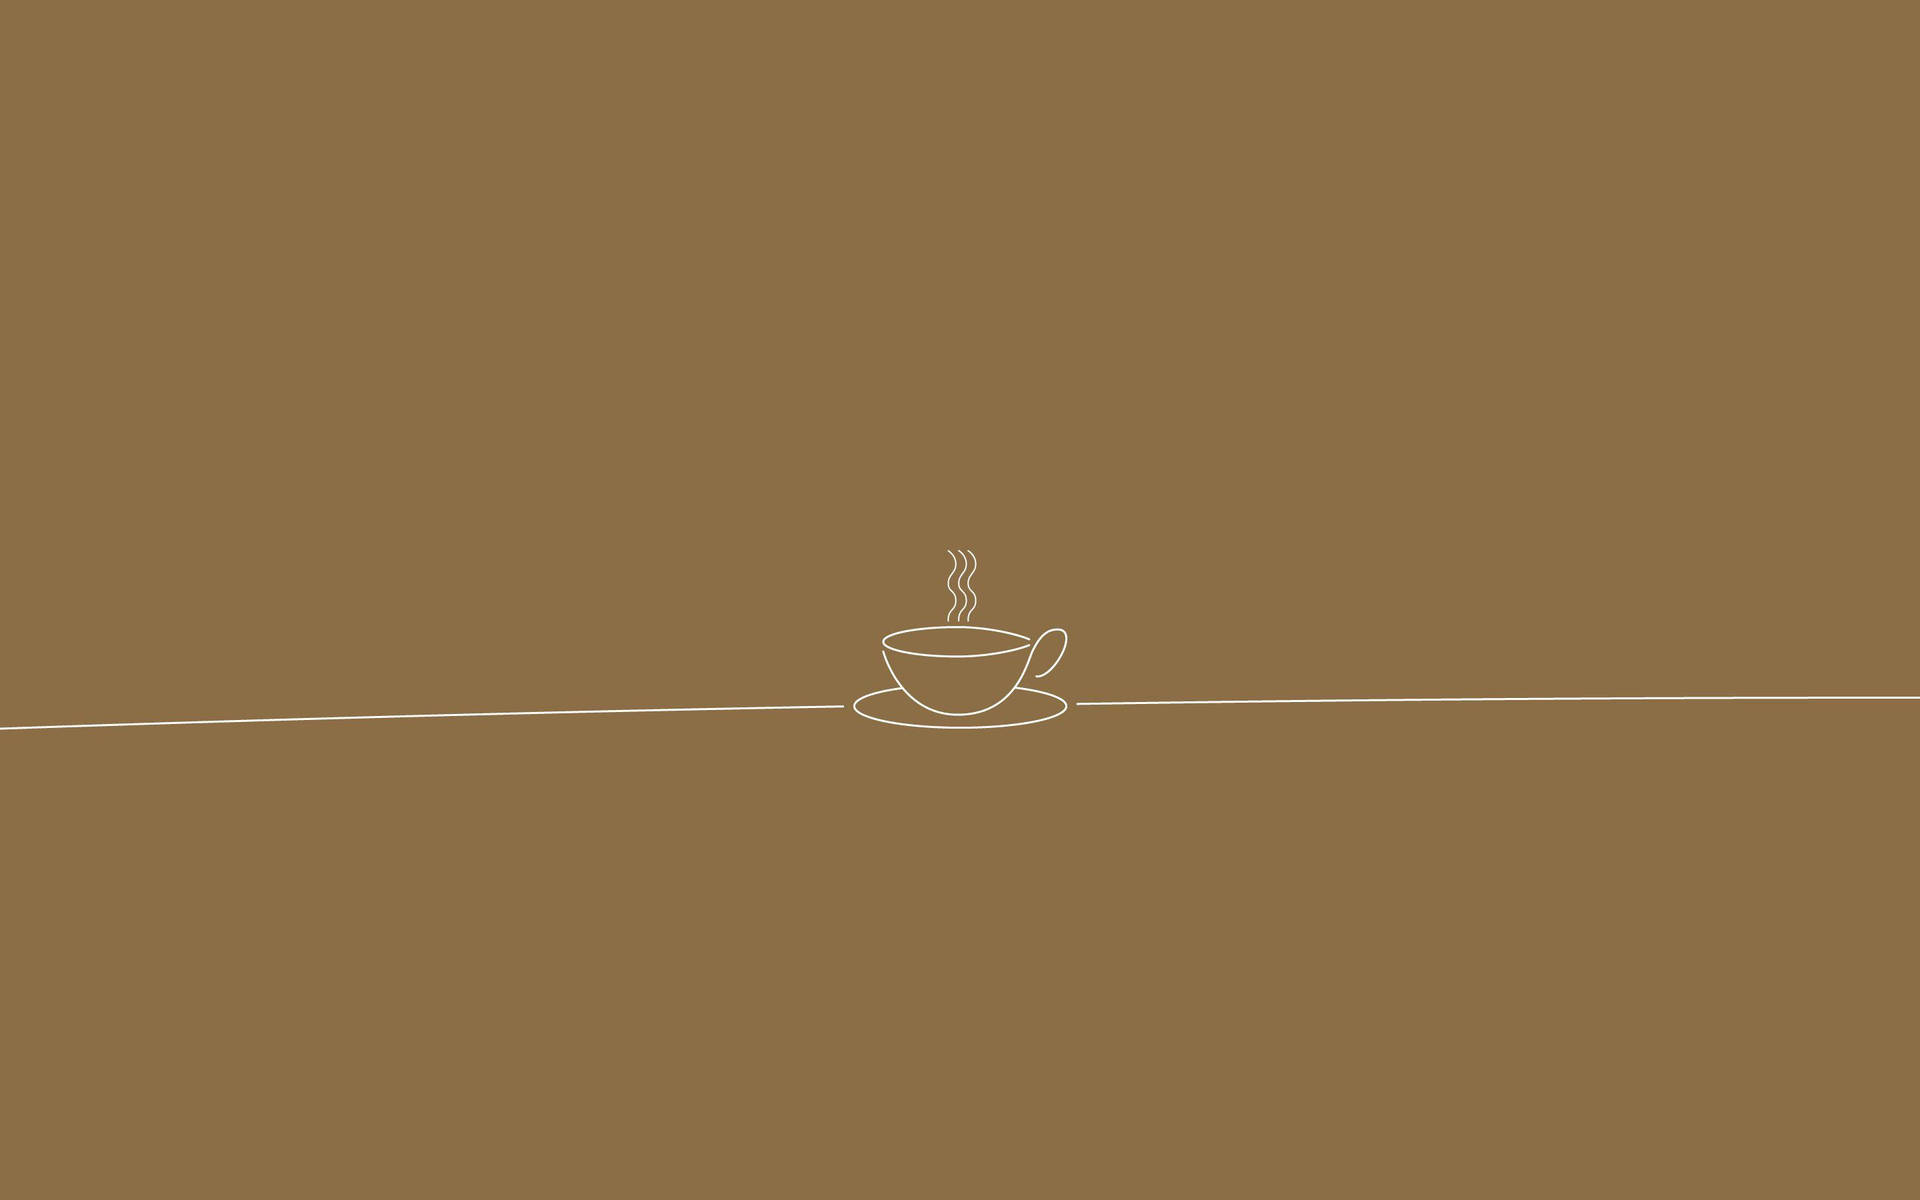 Light Brown Aesthetic Cup Doodle Art Background